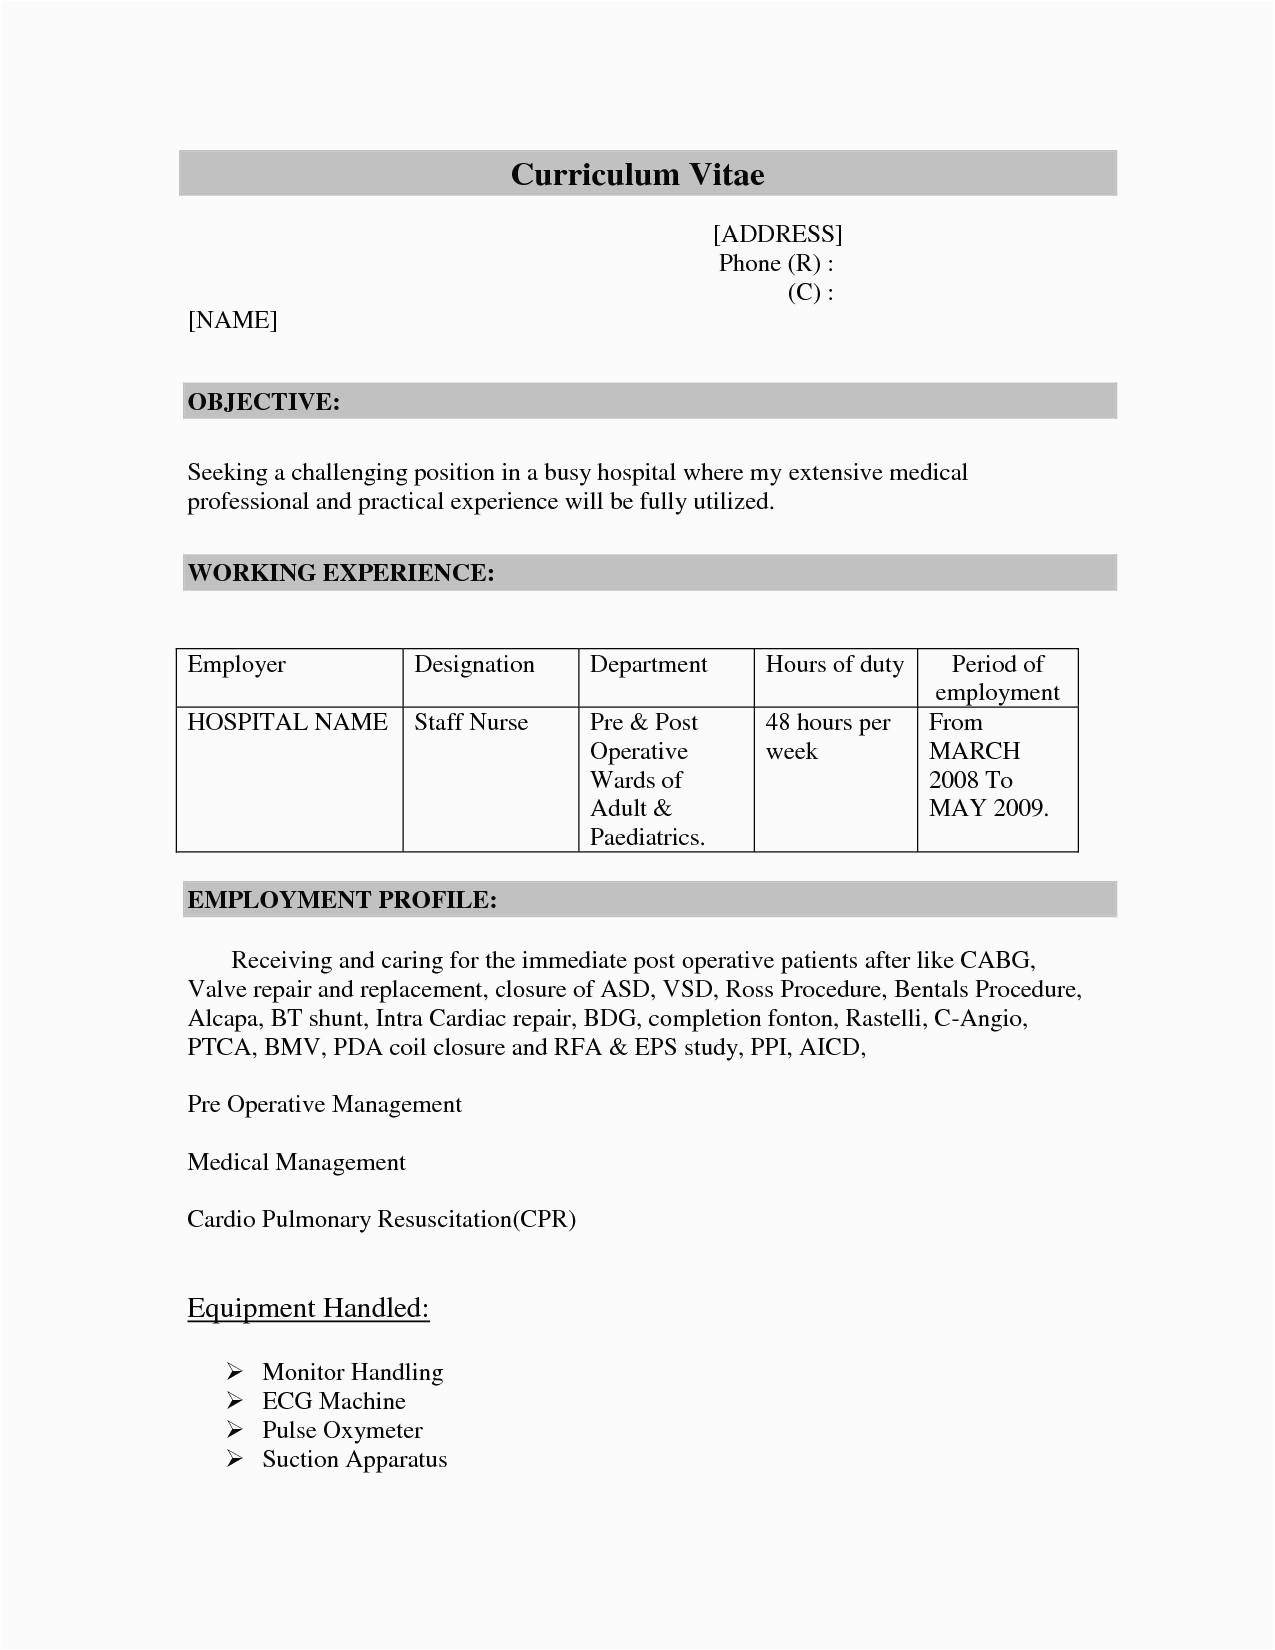 Sample Resume for Manual Testing with 1 Year Experience software Testing Resume Samples for 1 Year Experience